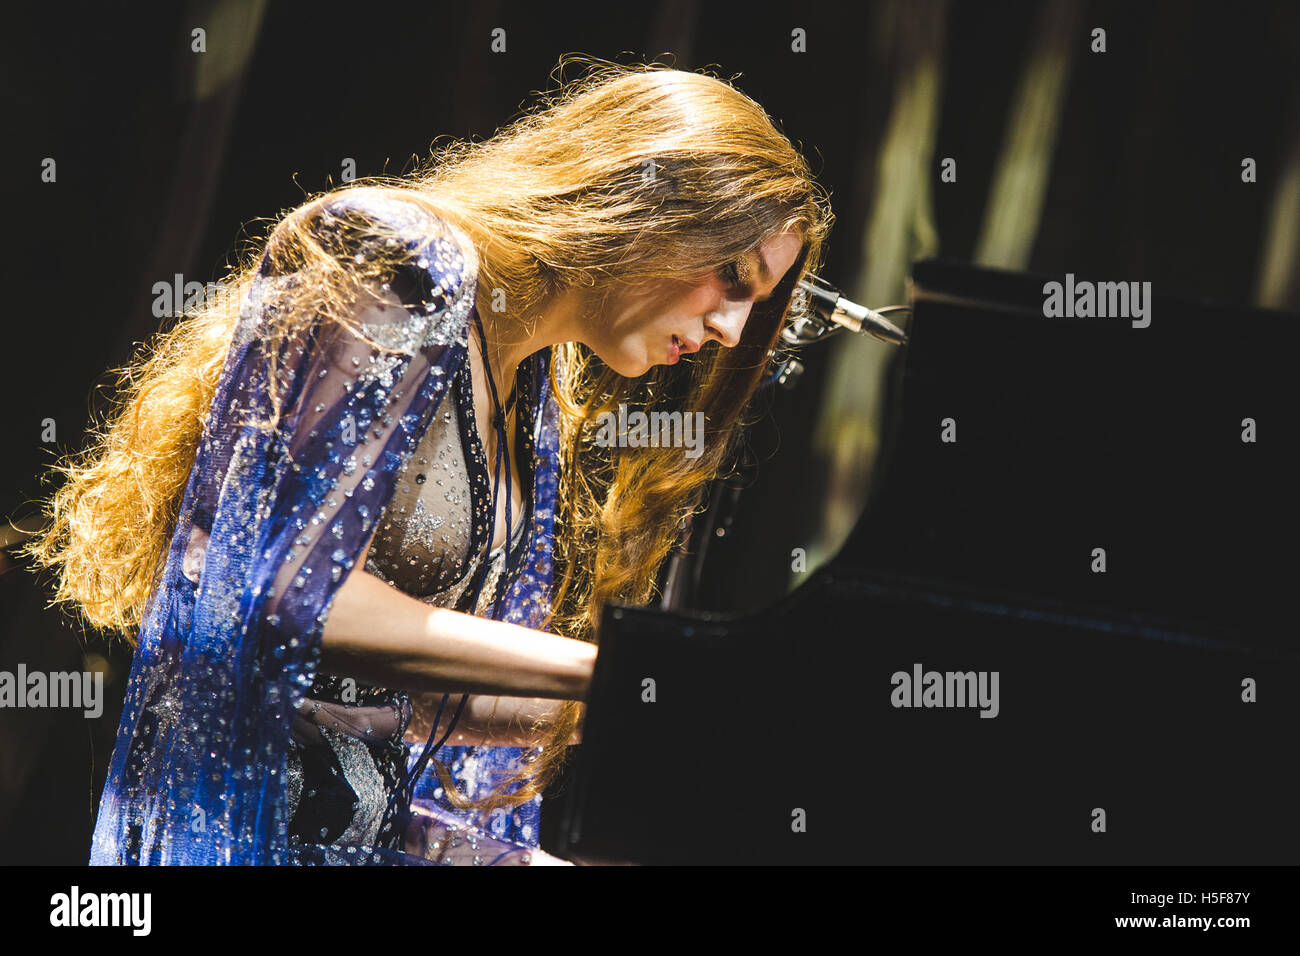 London, UK. 20th October, 2016. October 20, 2016 - English musician/singer/songwriter, Jasmine Lucilla Elizabeth Jennifer van den Bogaerde, better known by her stage name Birdy, performs at the Hammersmith Apollo, London, 2016 Credit:  Myles Wright/ZUMA Wire/Alamy Live News Stock Photo